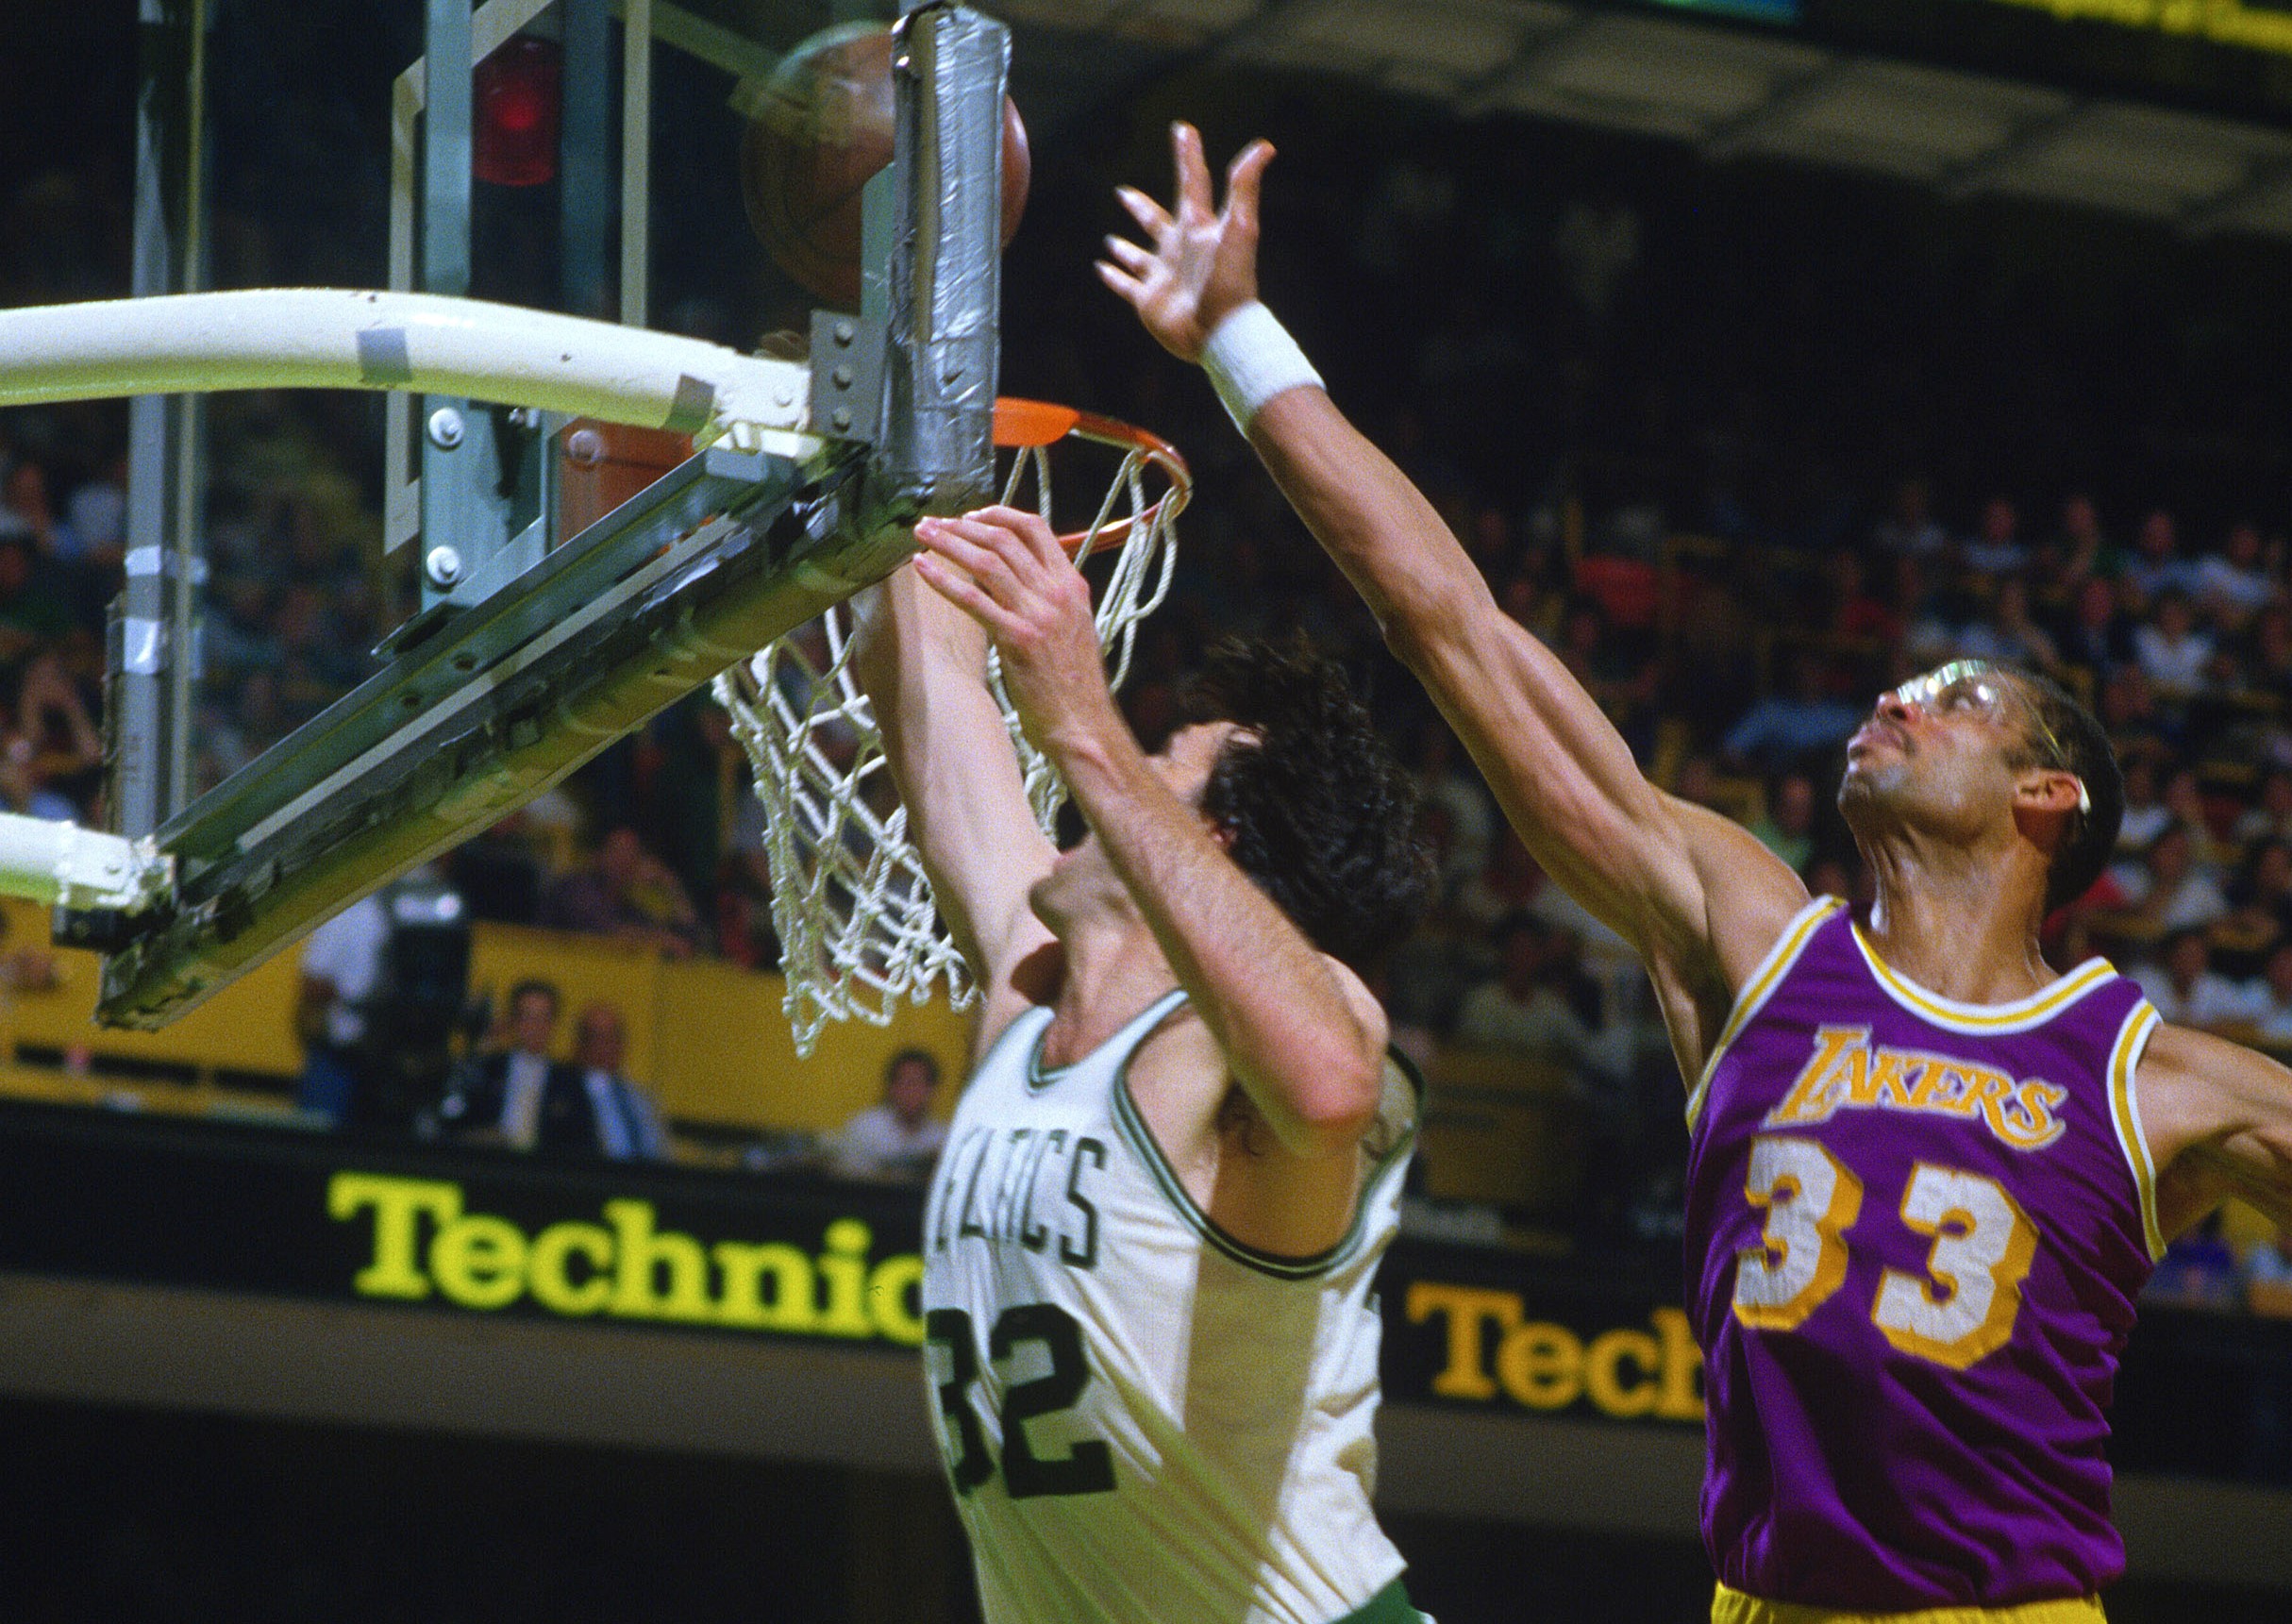 Kevin McHale of the Boston Celtics lays the ball up in front of Kareem Abdul-Jabbar of the Los Angeles Lakers.